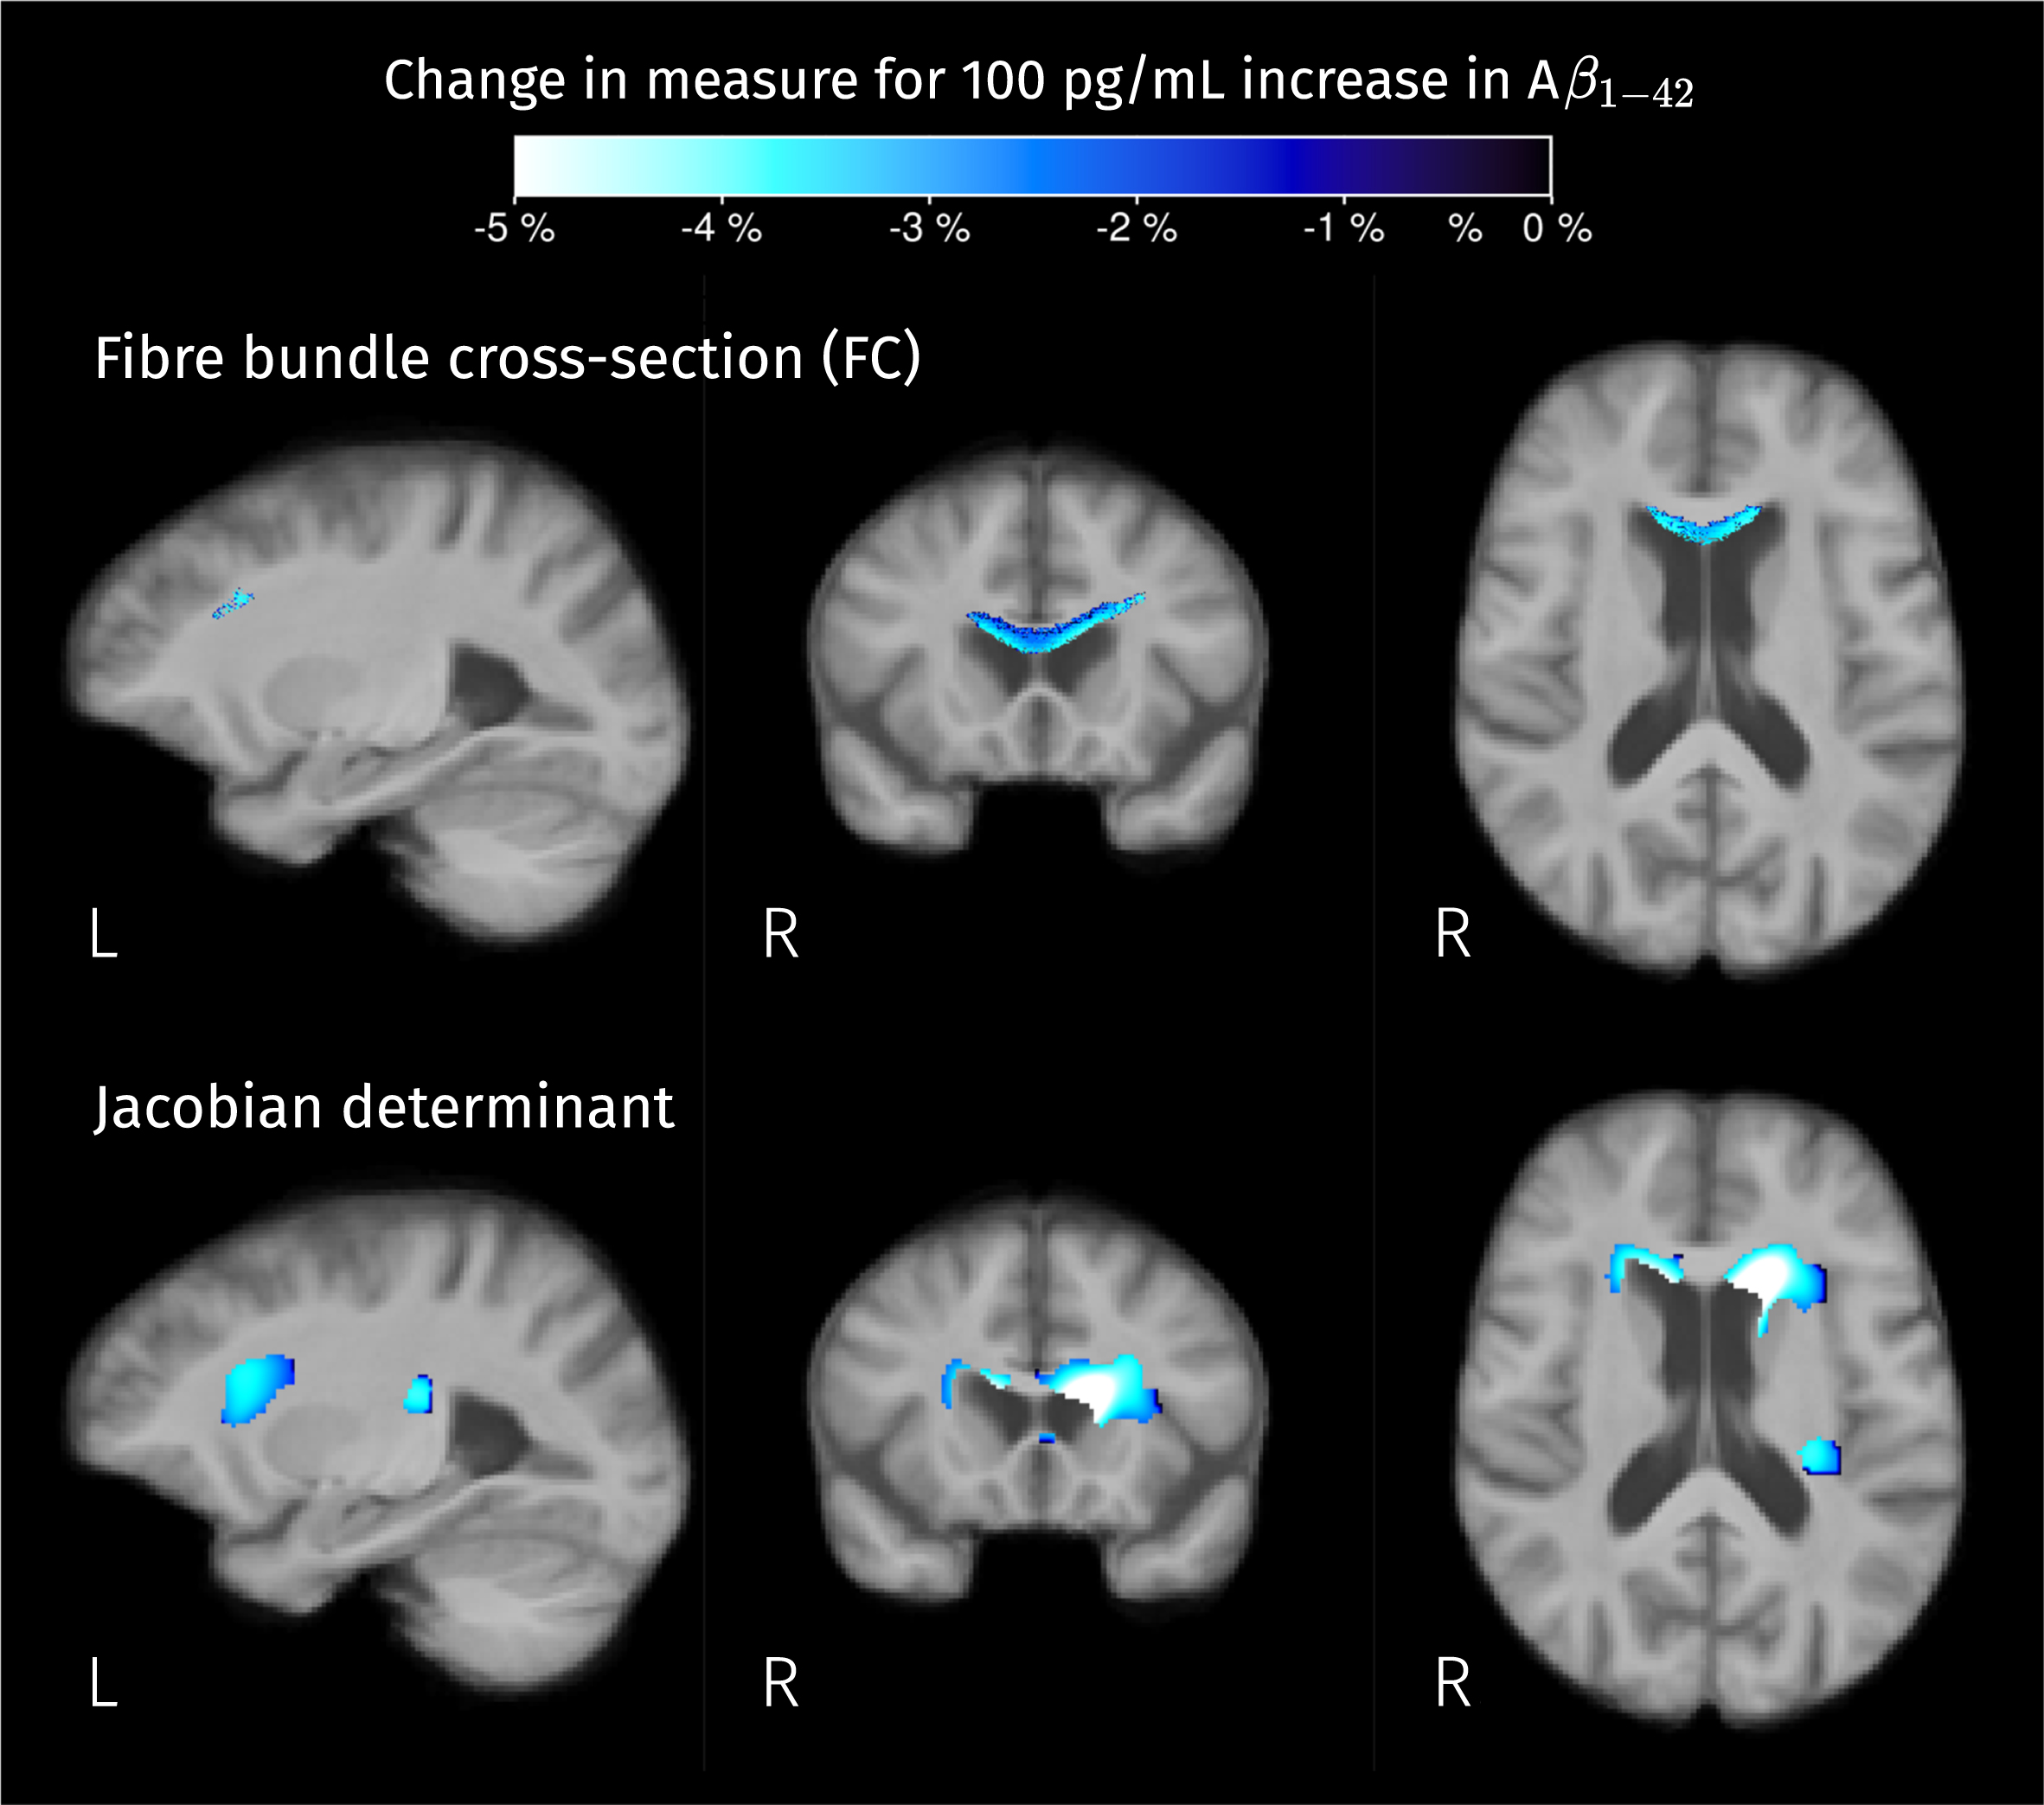 Brain areas where there is a significant linear relation between CSF biomarker for Aβ1–42 and measures of macroscopic change relative to the population template. Color corresponds to the percentage of change in these measures for a 100 pg/mL increase in biomarker value. Given that analyses for fiber cross-section and Jacobian determinant were performed in the log scale, the color-coded effects in significant areas were calculated as exp(β×100) – 1 where β is the GLM coefficient of Aβ1–42 for the corresponding measure.